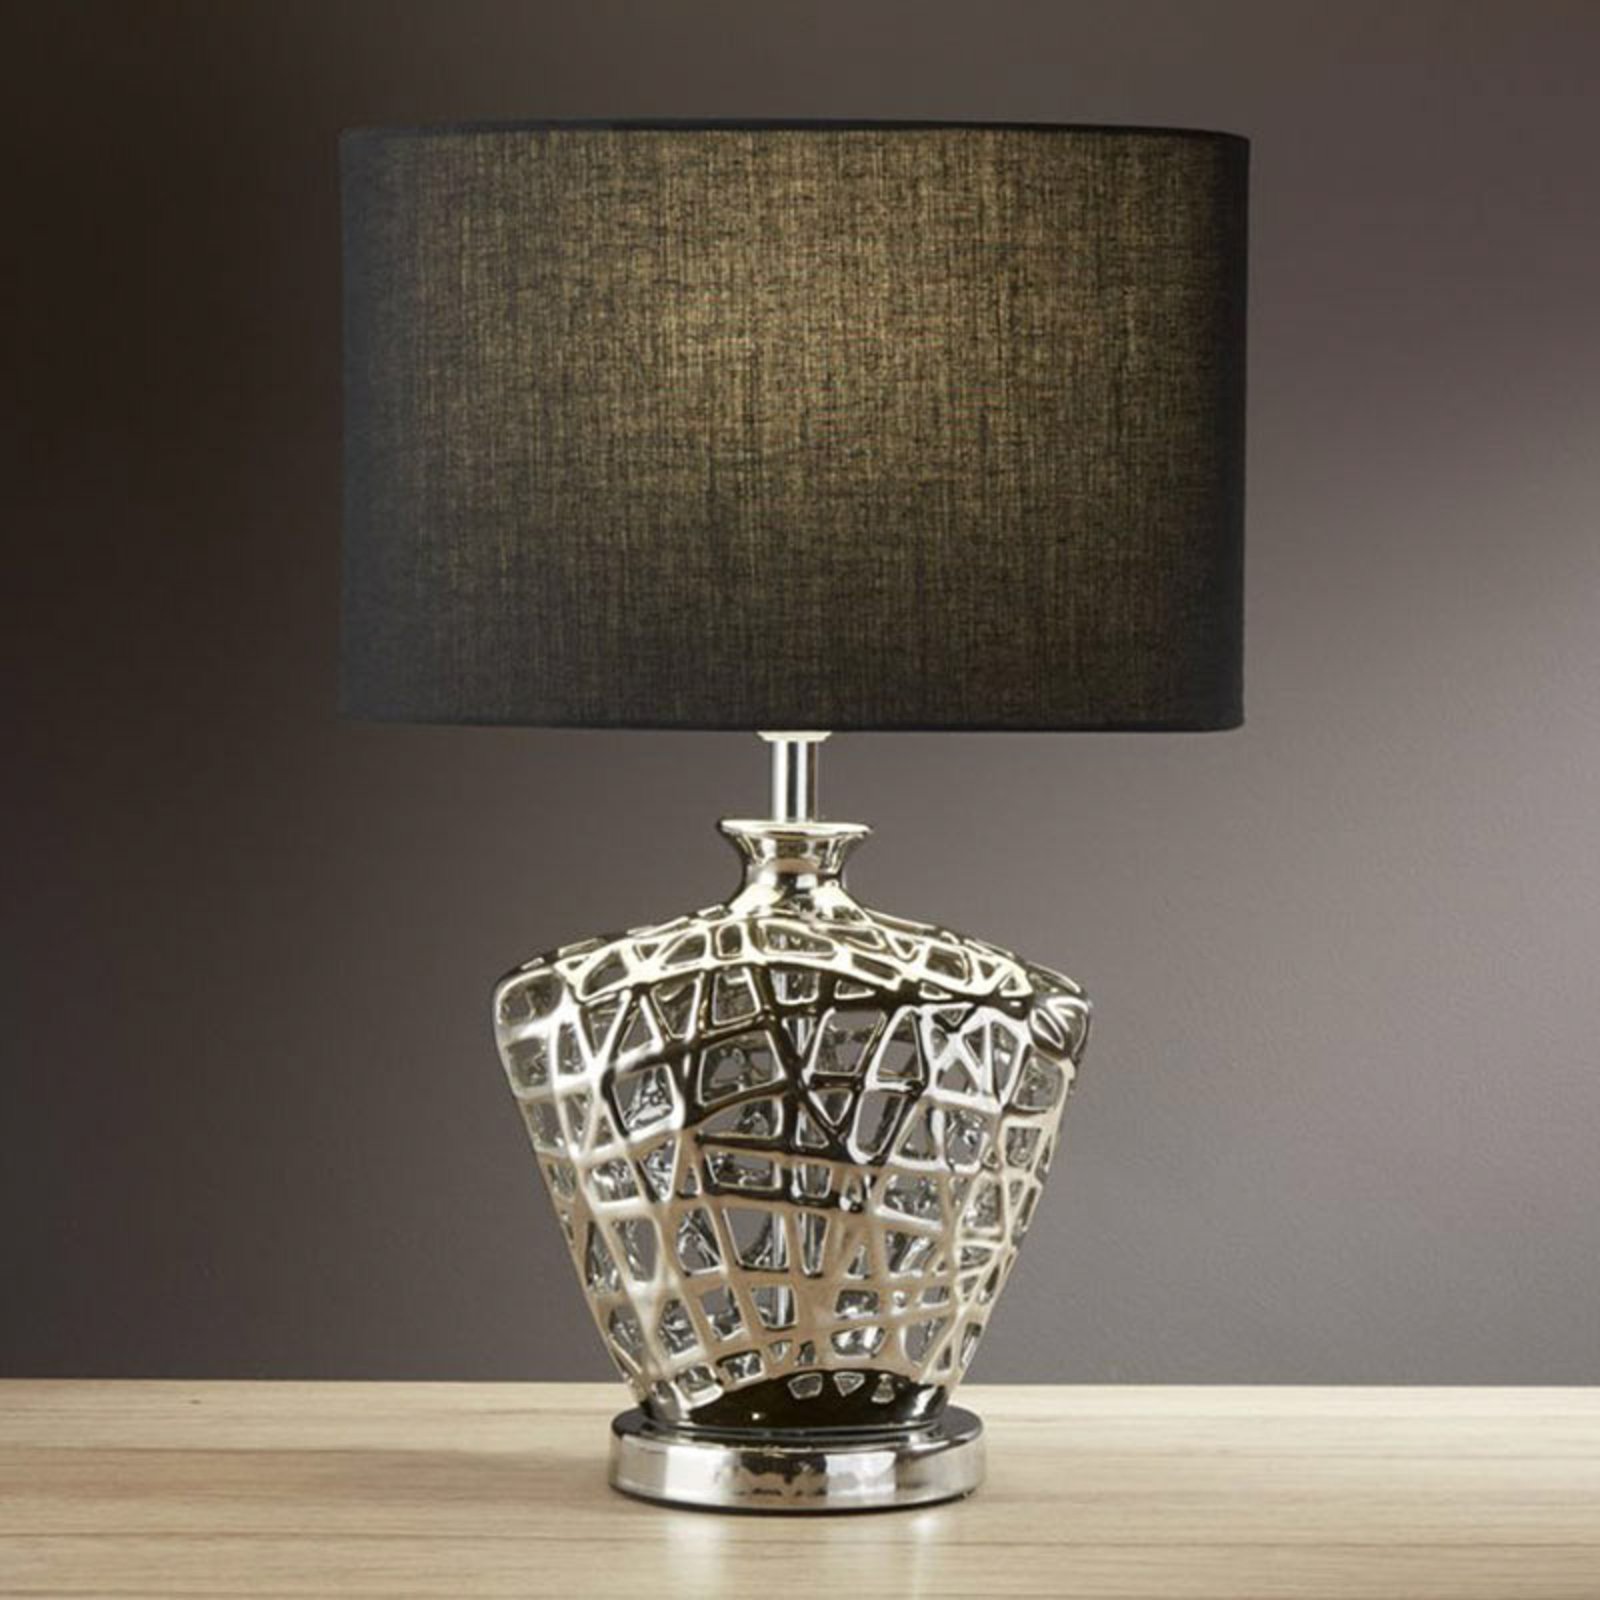 Network table lamp with black fabric lampshade